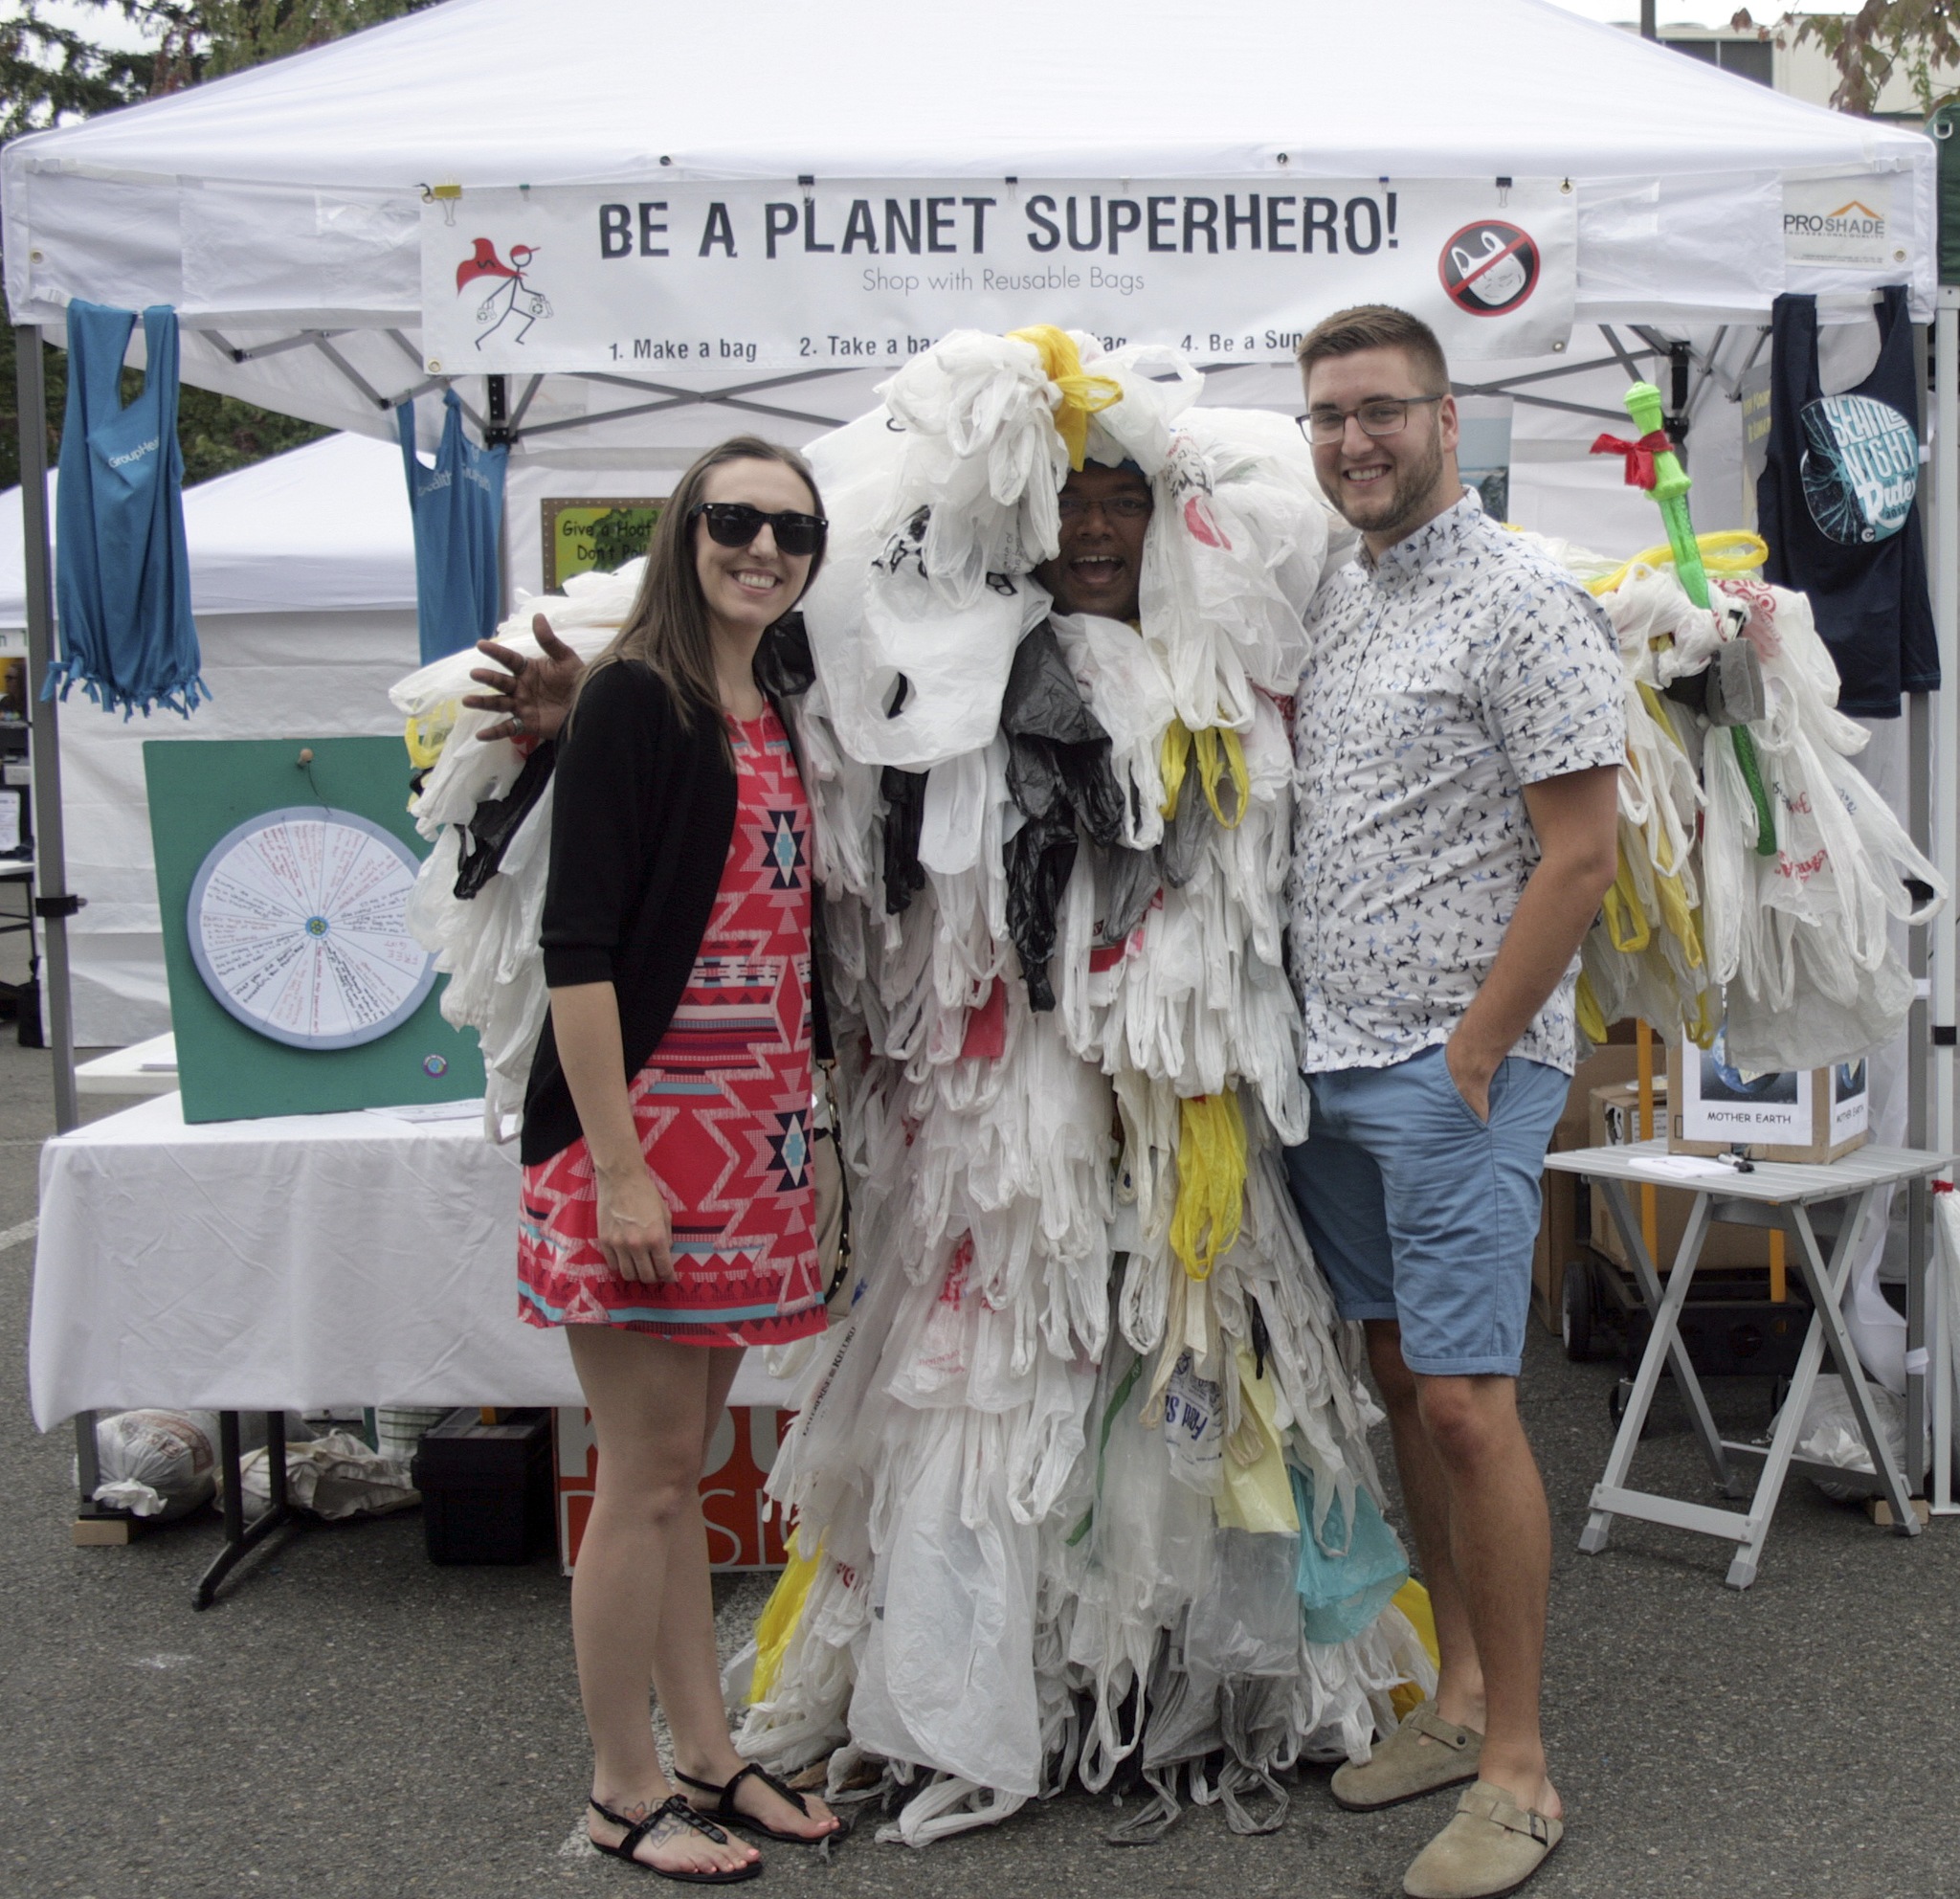 Slyvester Vijay Rozario dressed in plastic bags poses with festival-goers July 17 at Covington Days near the Bag Busters booth. ANA KAREN PEREZ GUZMAN